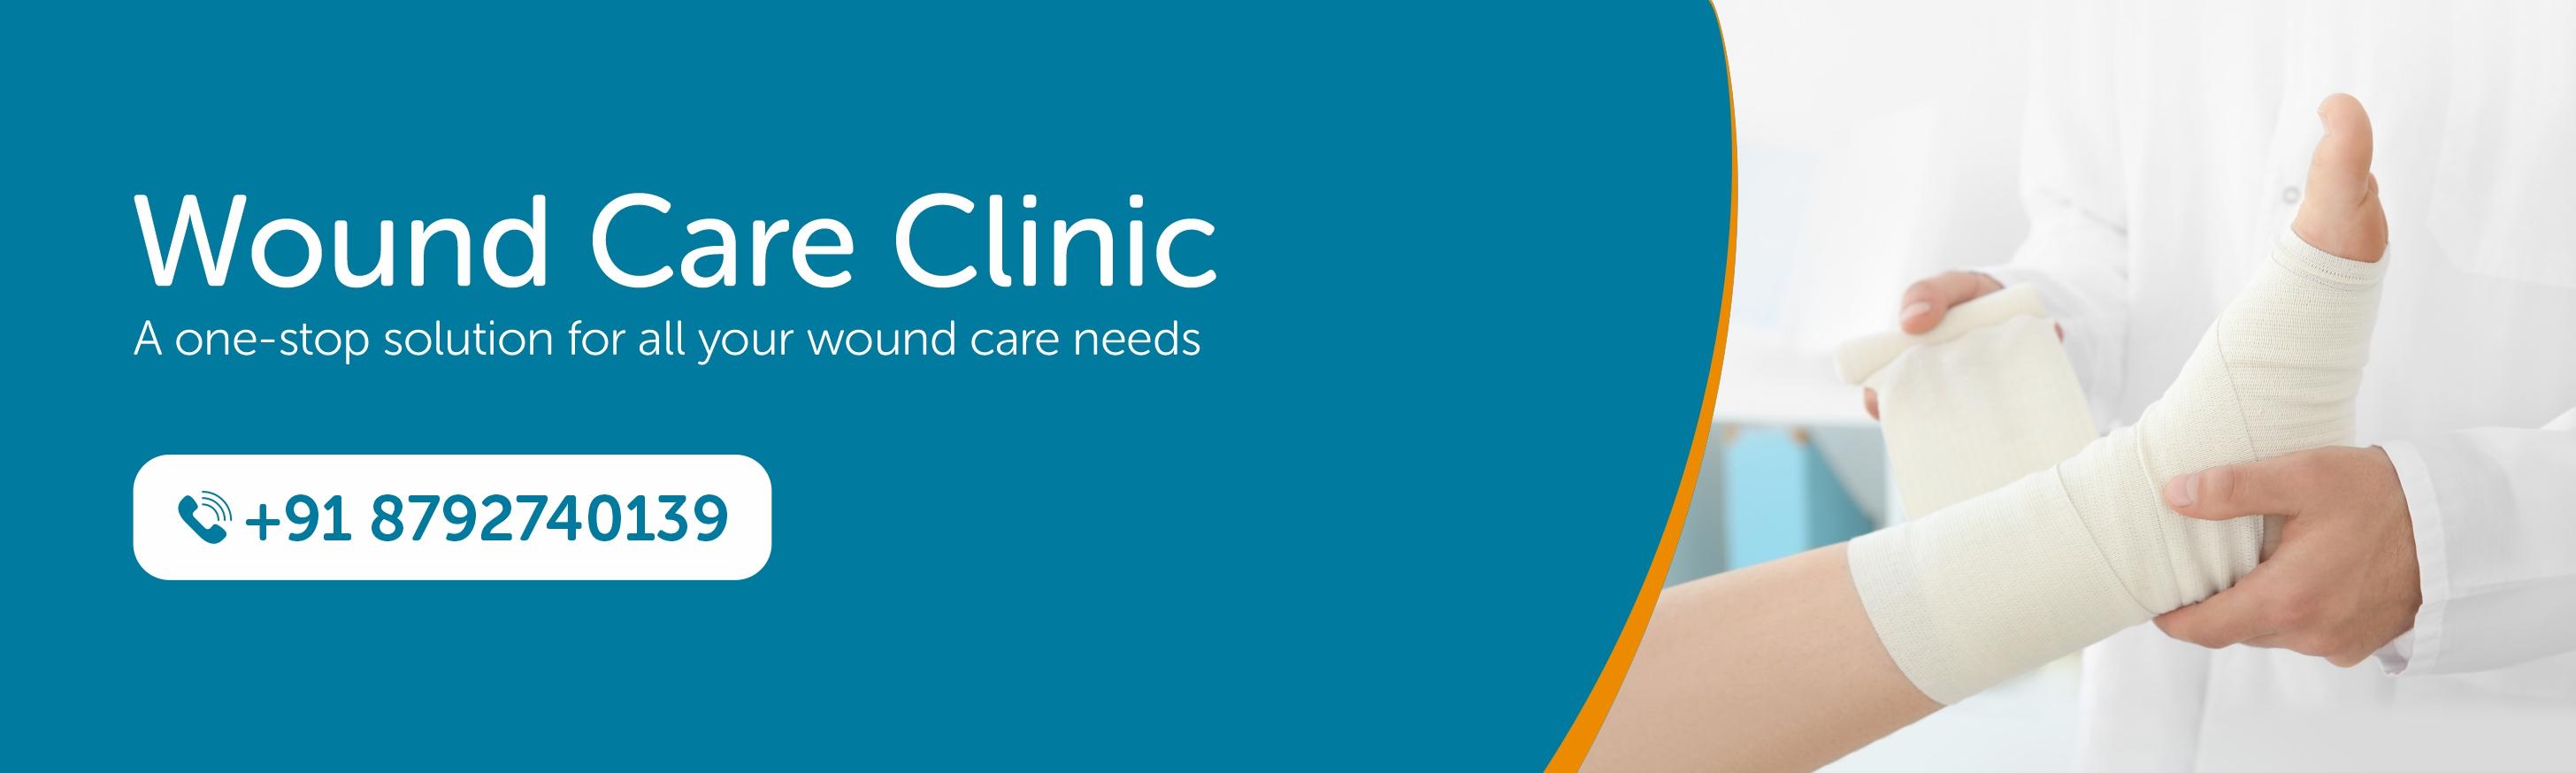 Website Banner_ Wound Care Clinic - W2912XH874